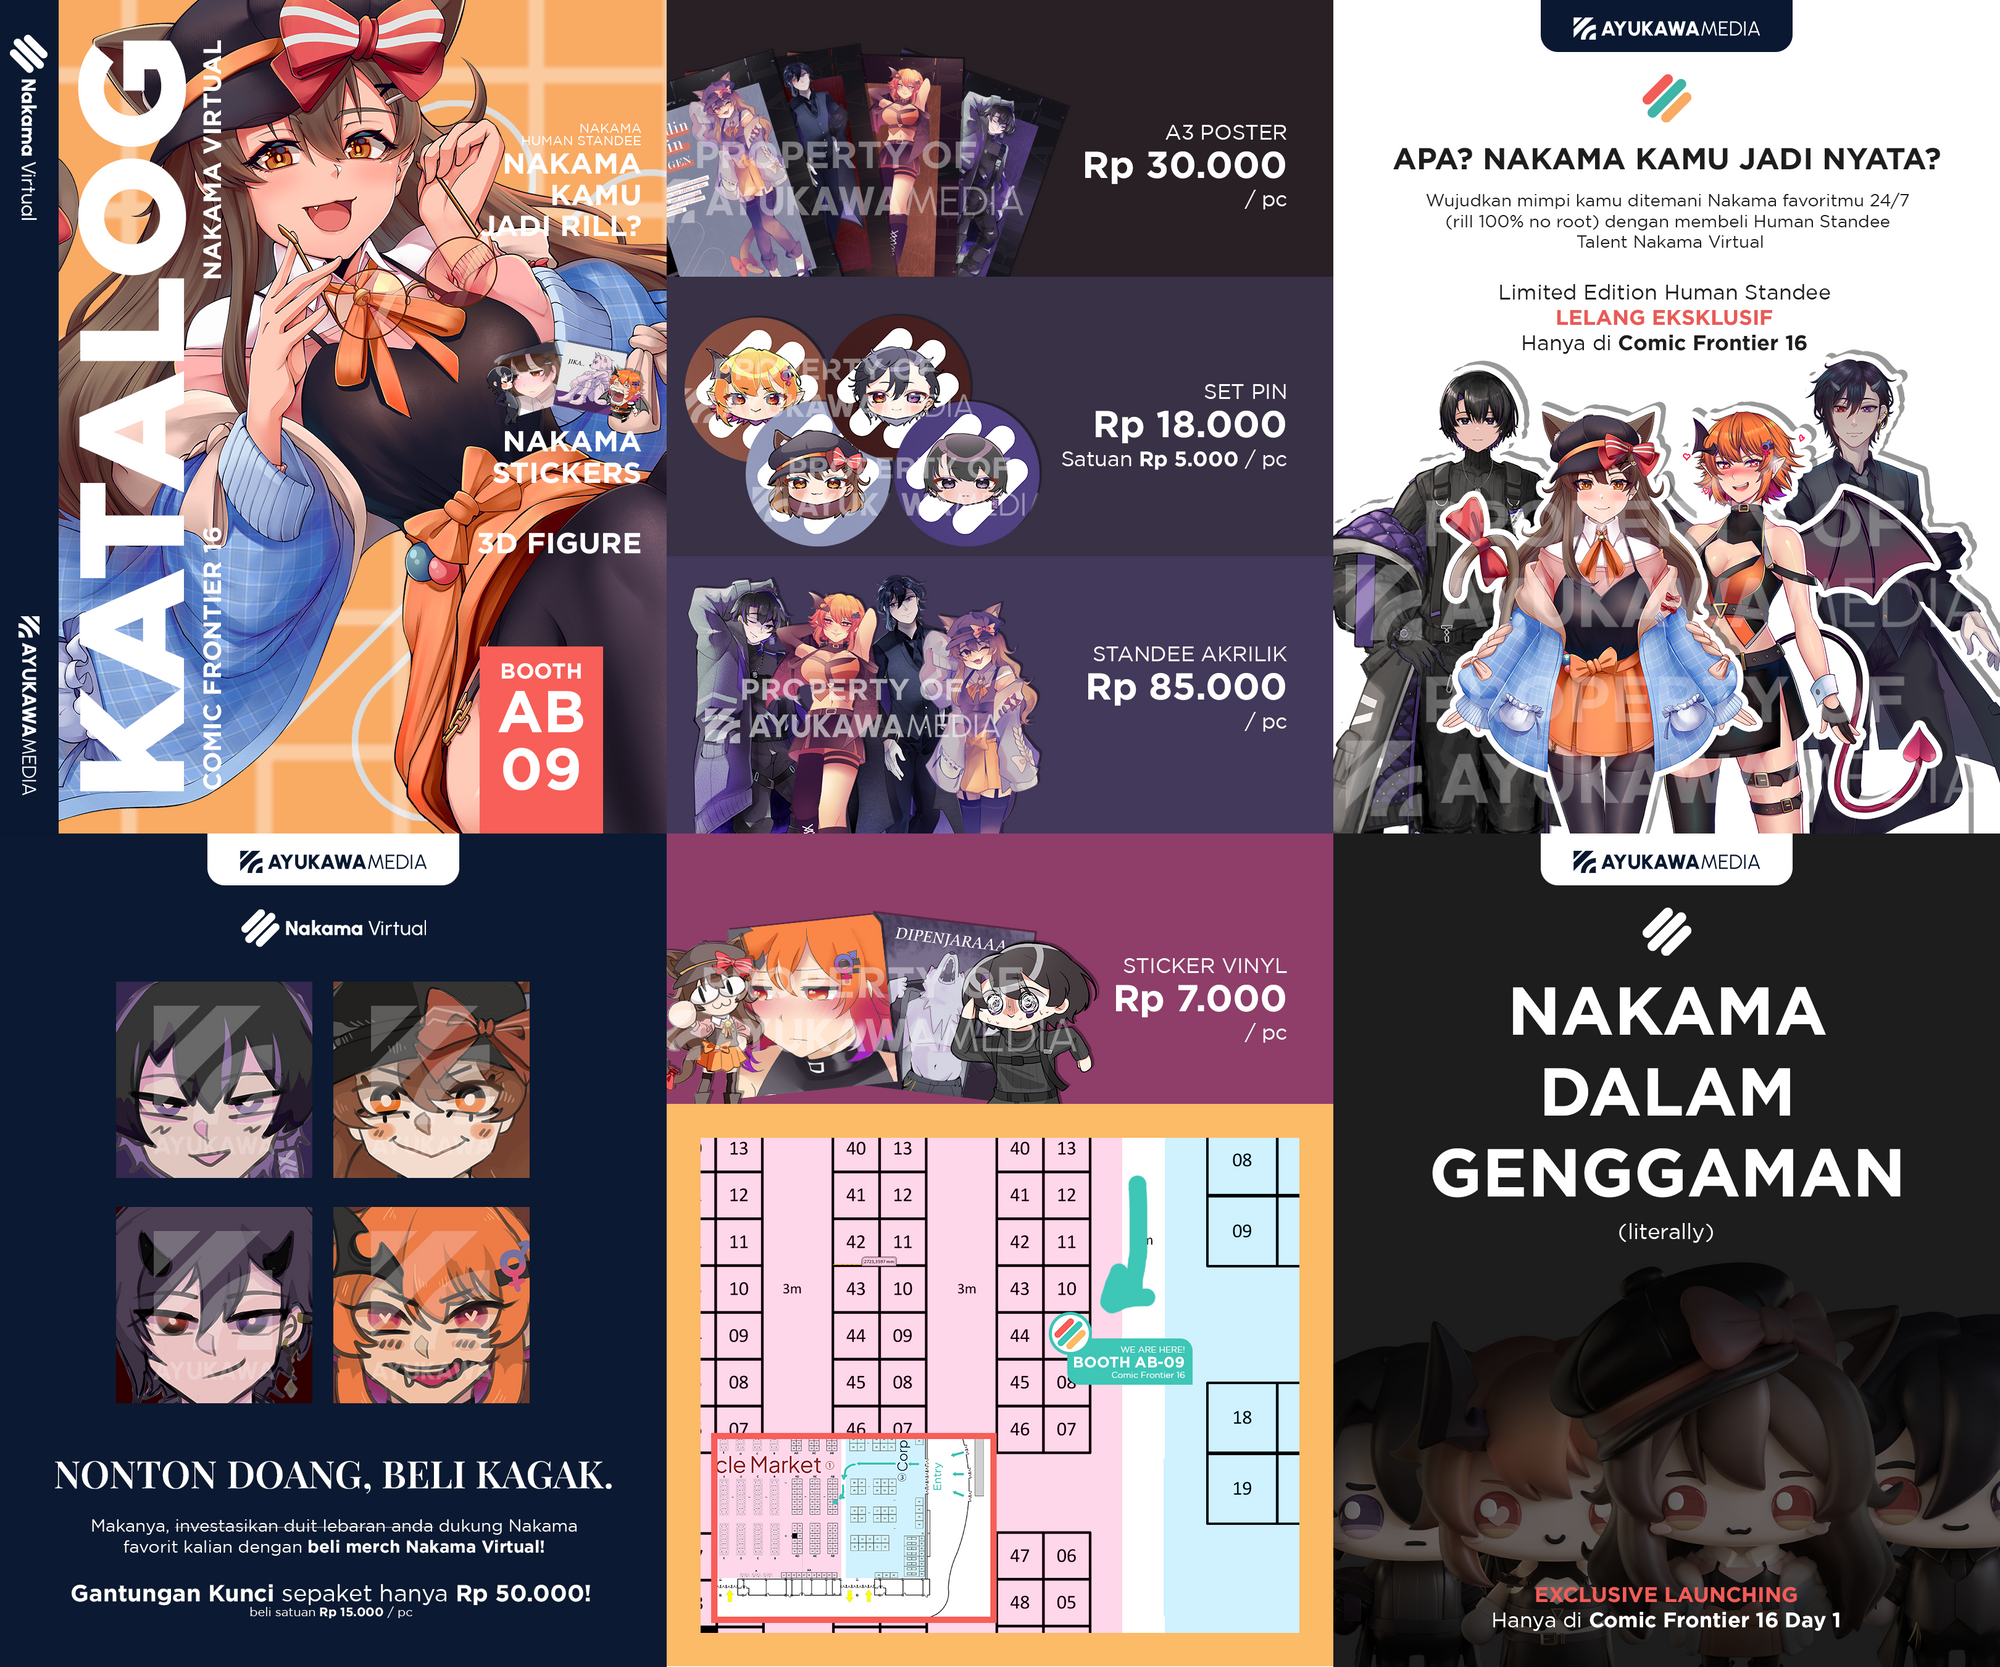 Don't Miss Out on Nakama Virtual's Exclusive VTuber Merchandise at Comifuro 16!